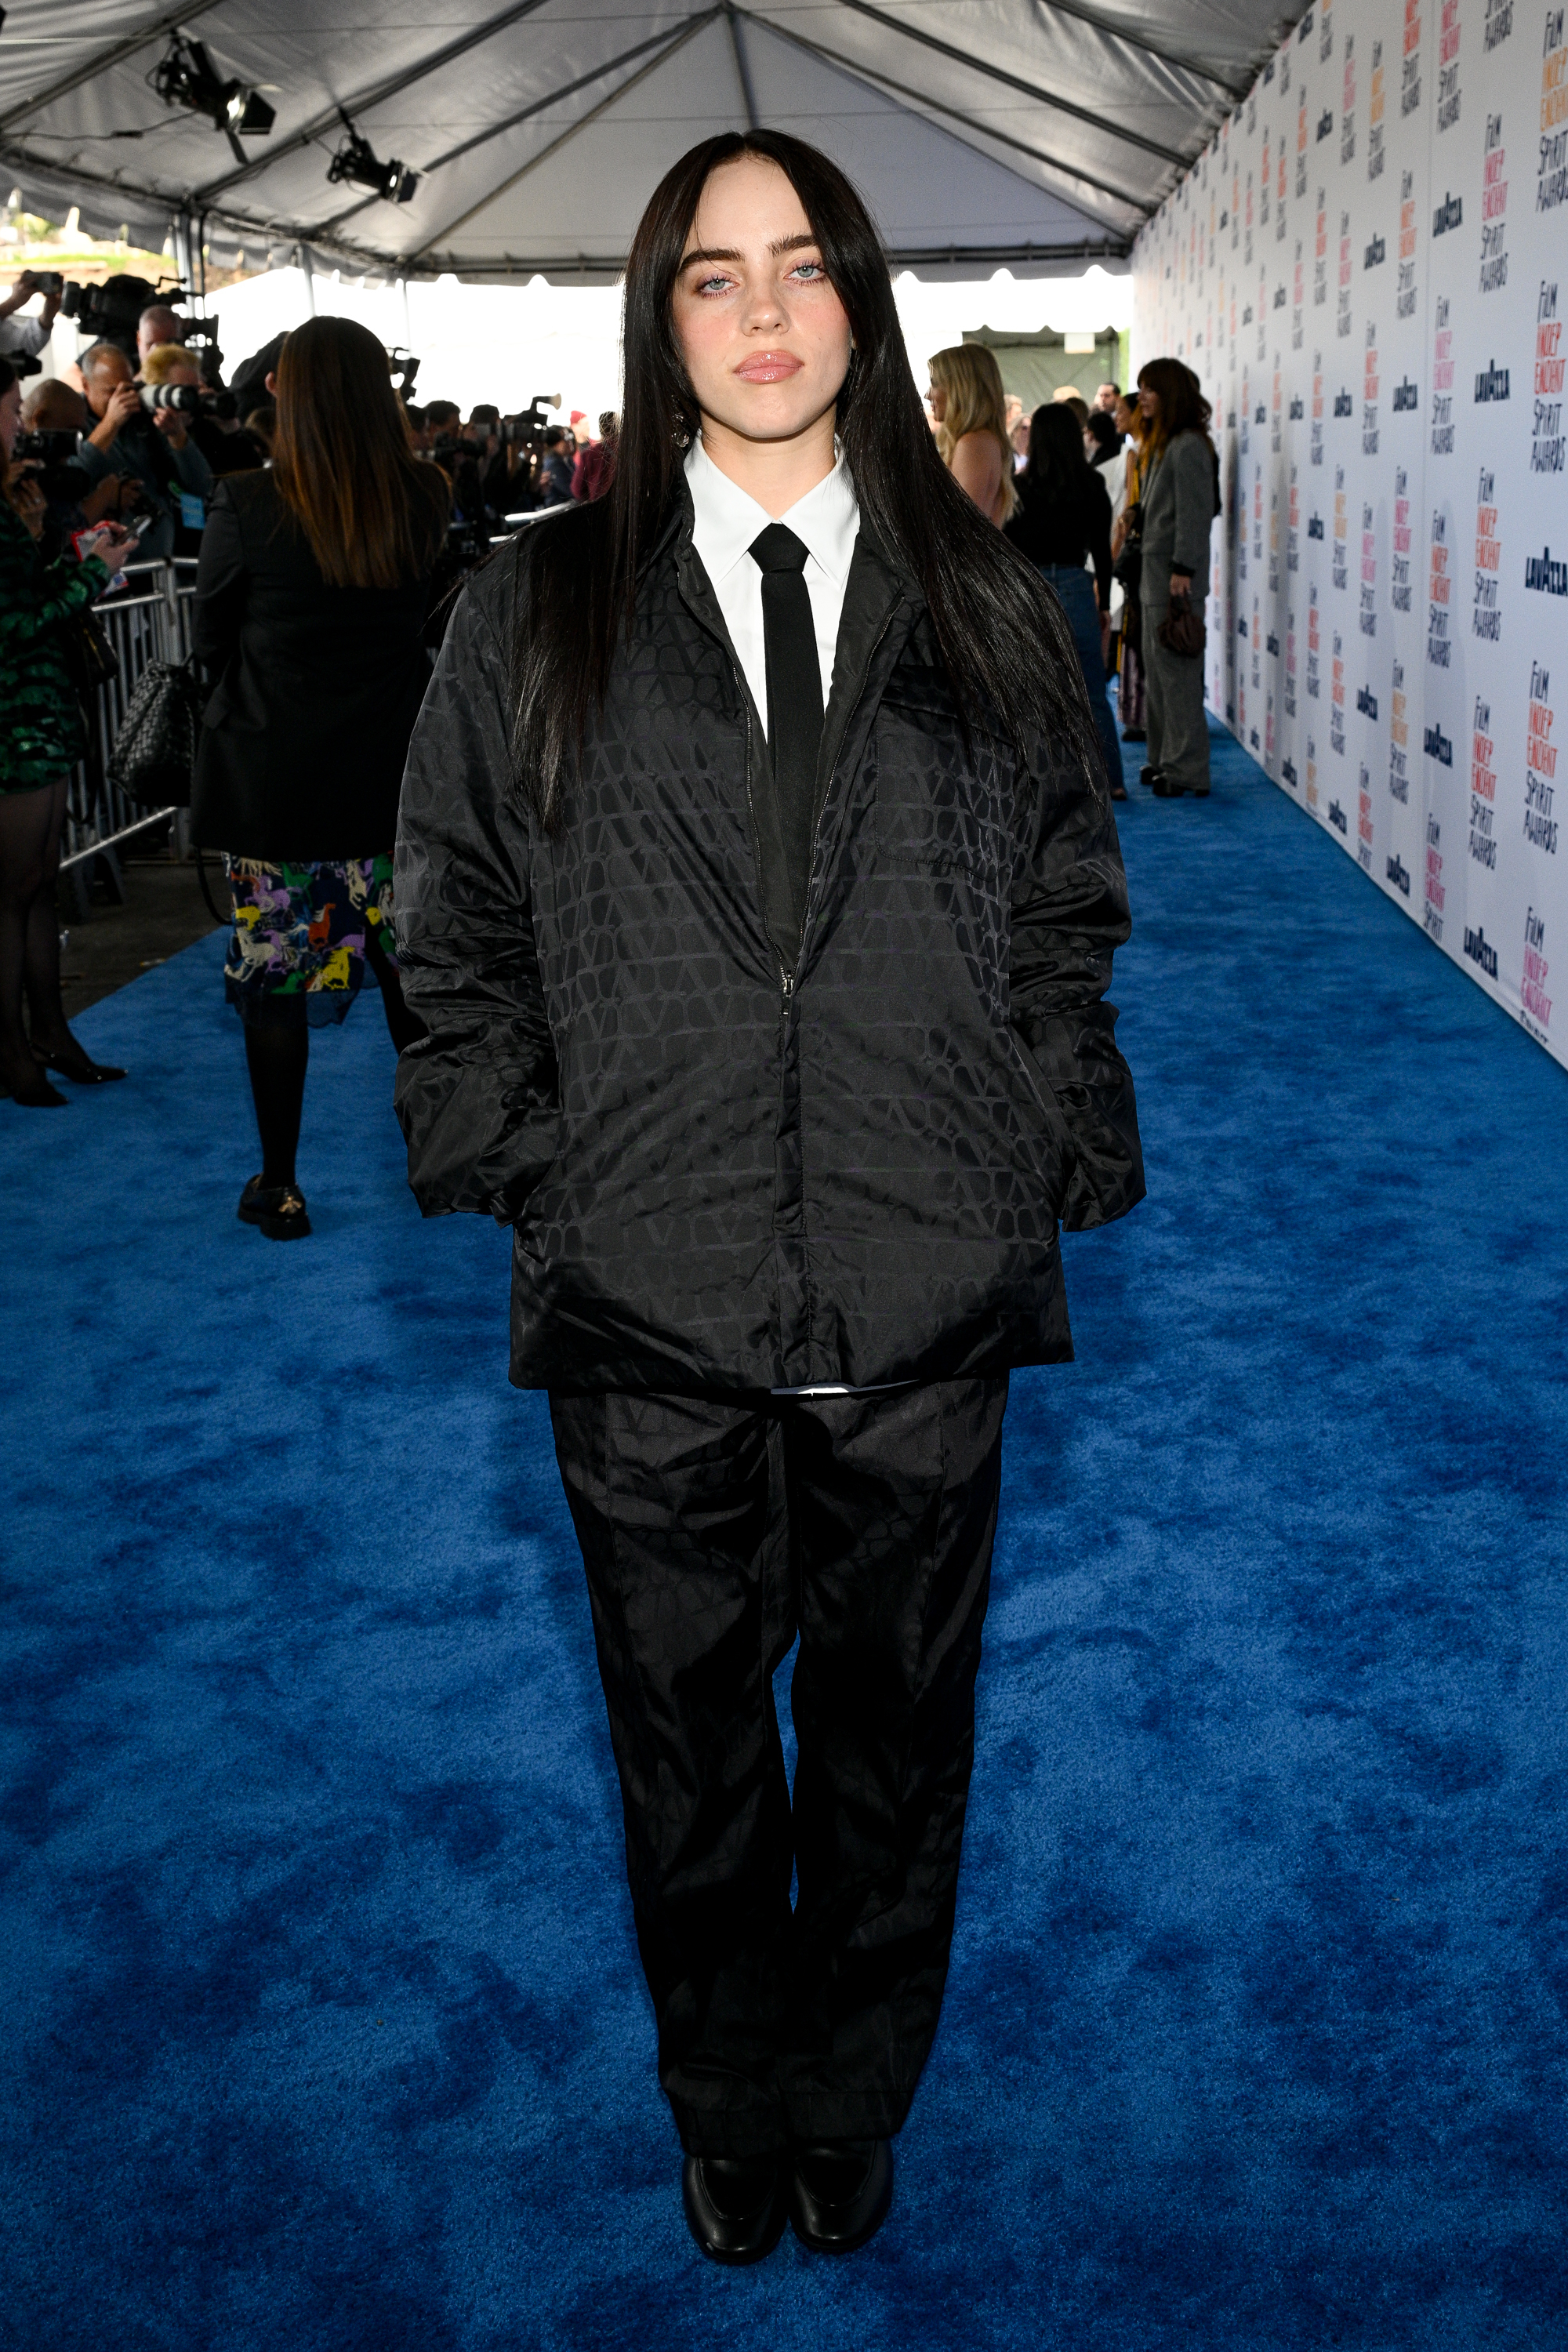 Billie Eilish in an oversized patterned suit on a blue carpet event